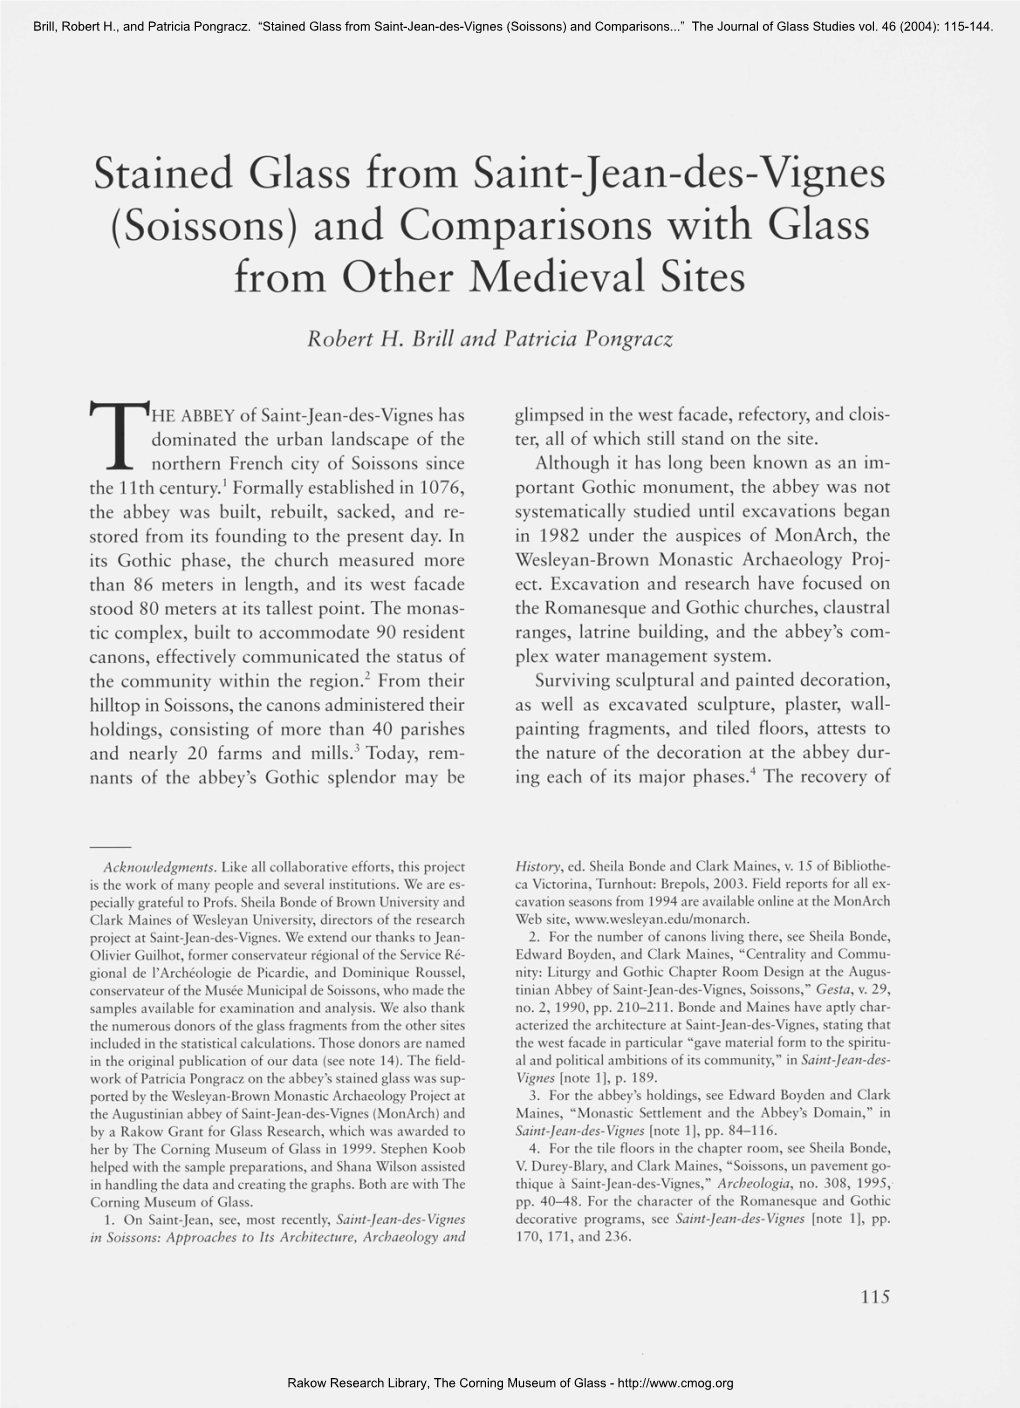 Stained Glass from Saint-Jean-Des-Vignes (Soissons) and Comparisons...” the Journal of Glass Studies Vol